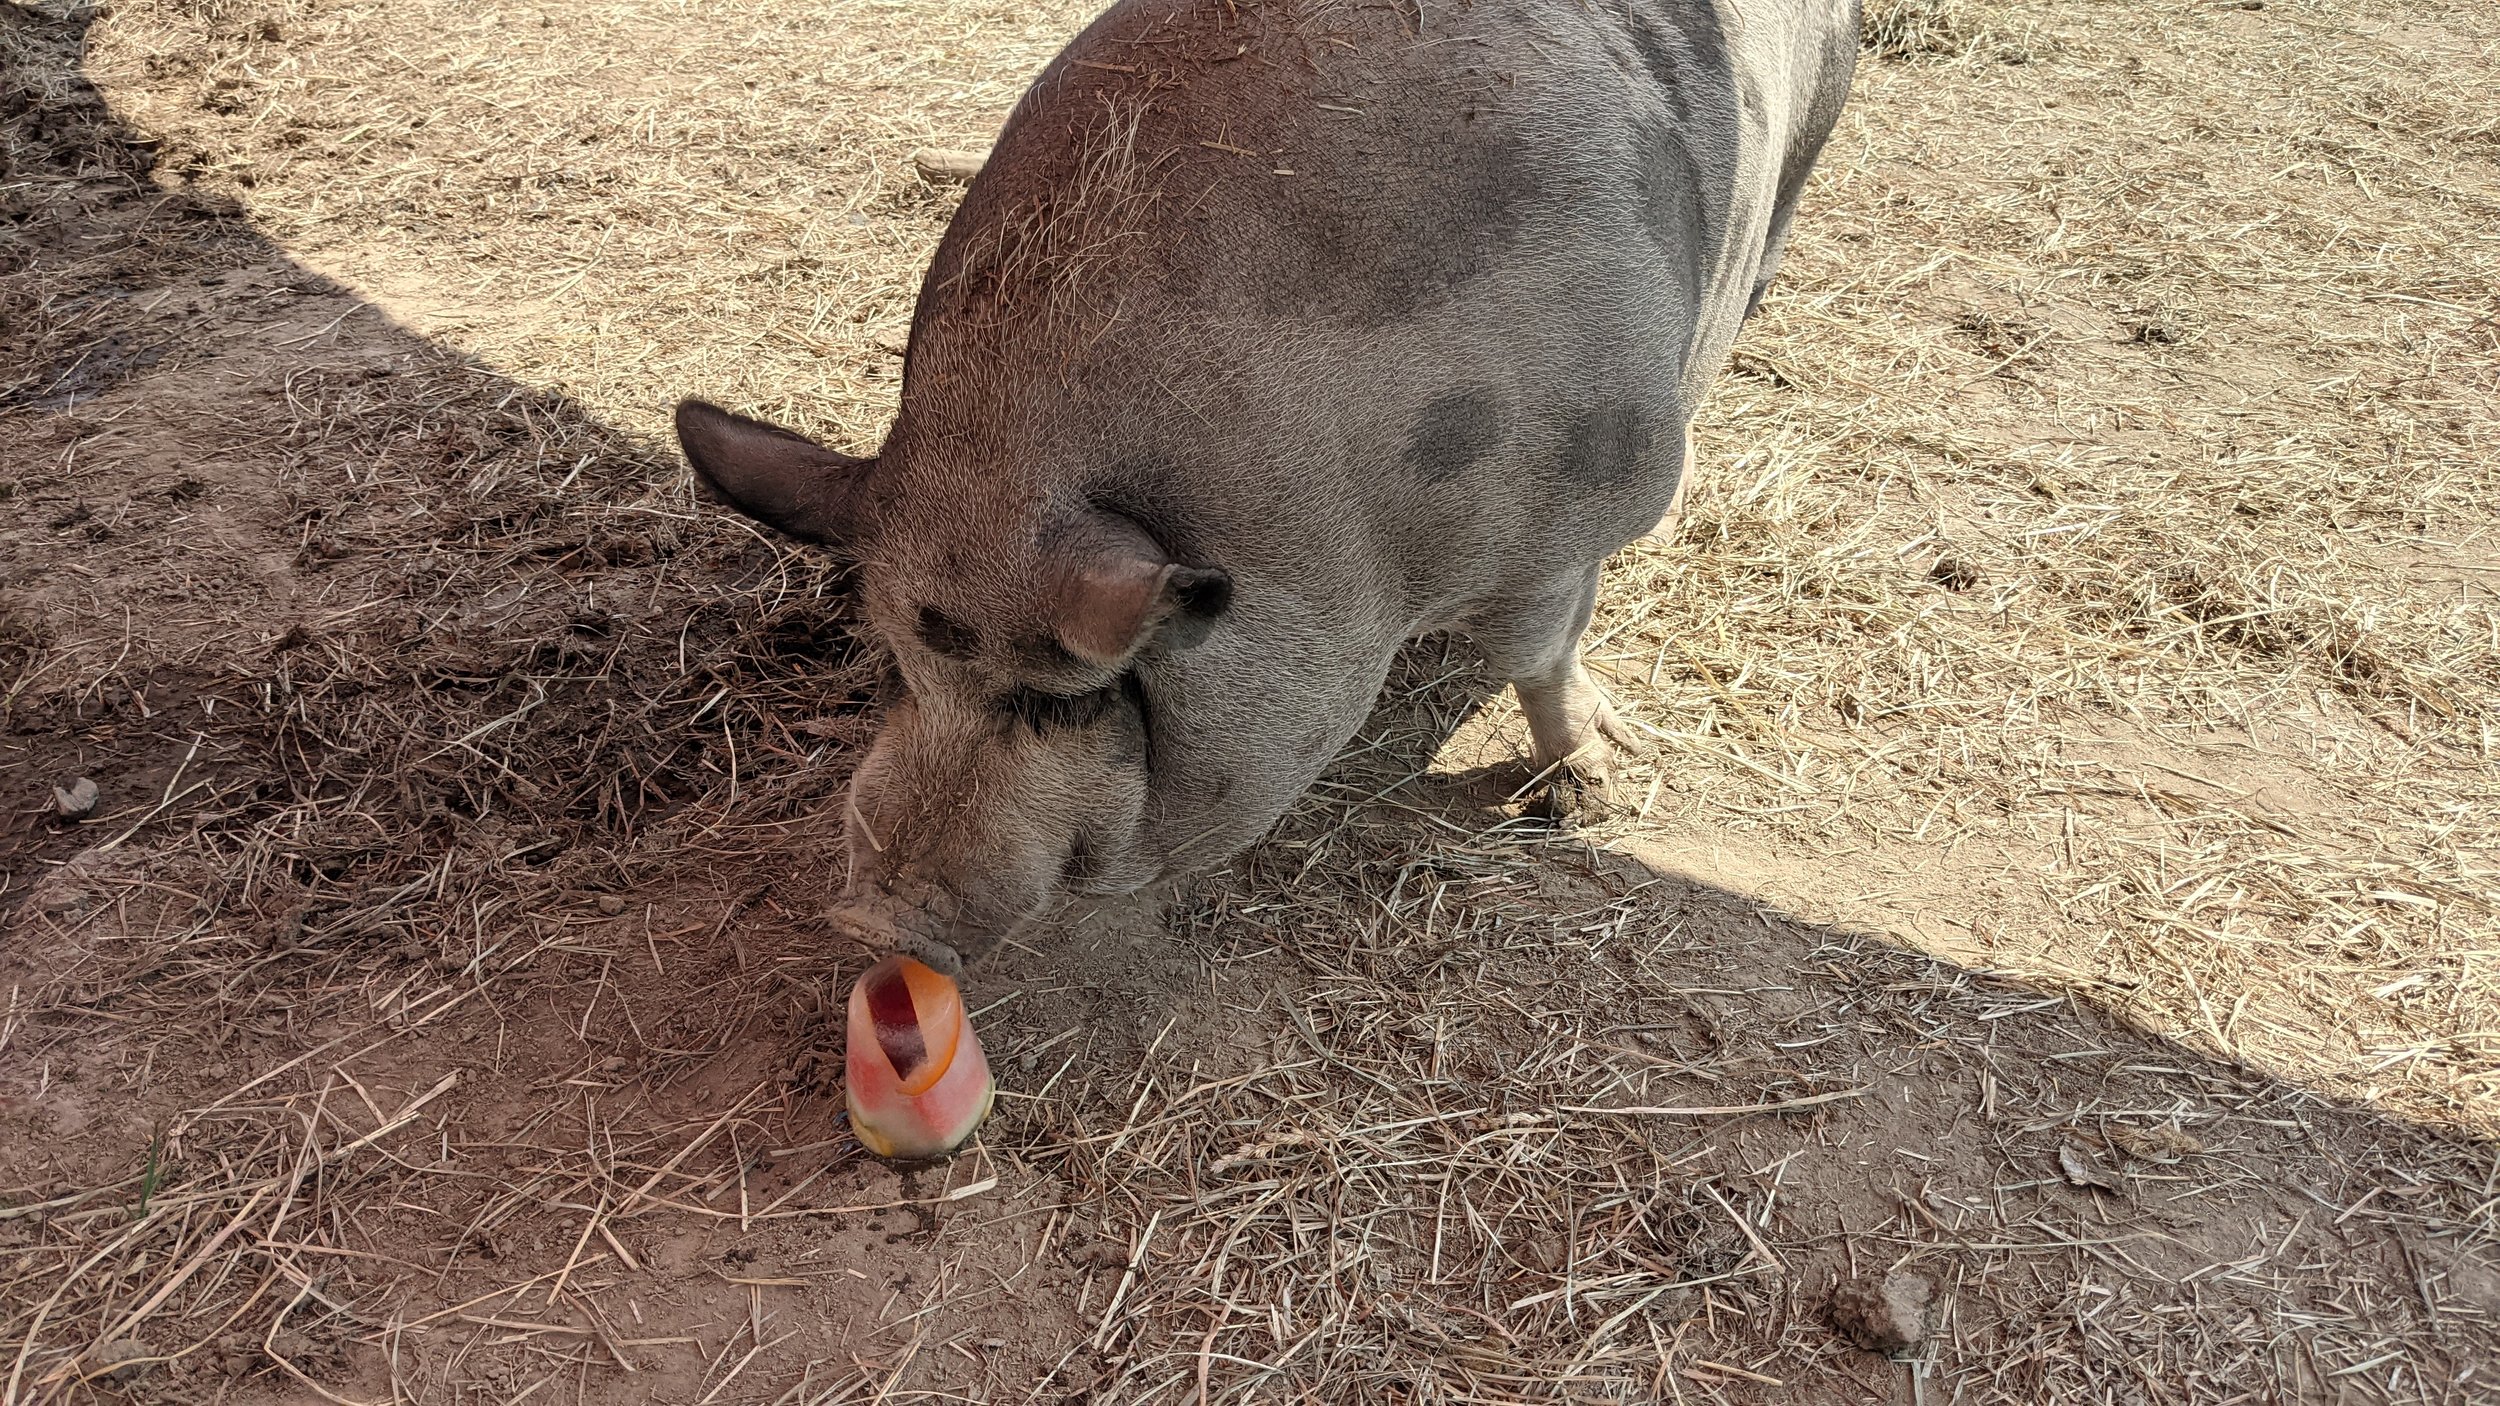  We made lots of carrot and watermelon popsicles for all our animals during the heat wave. 